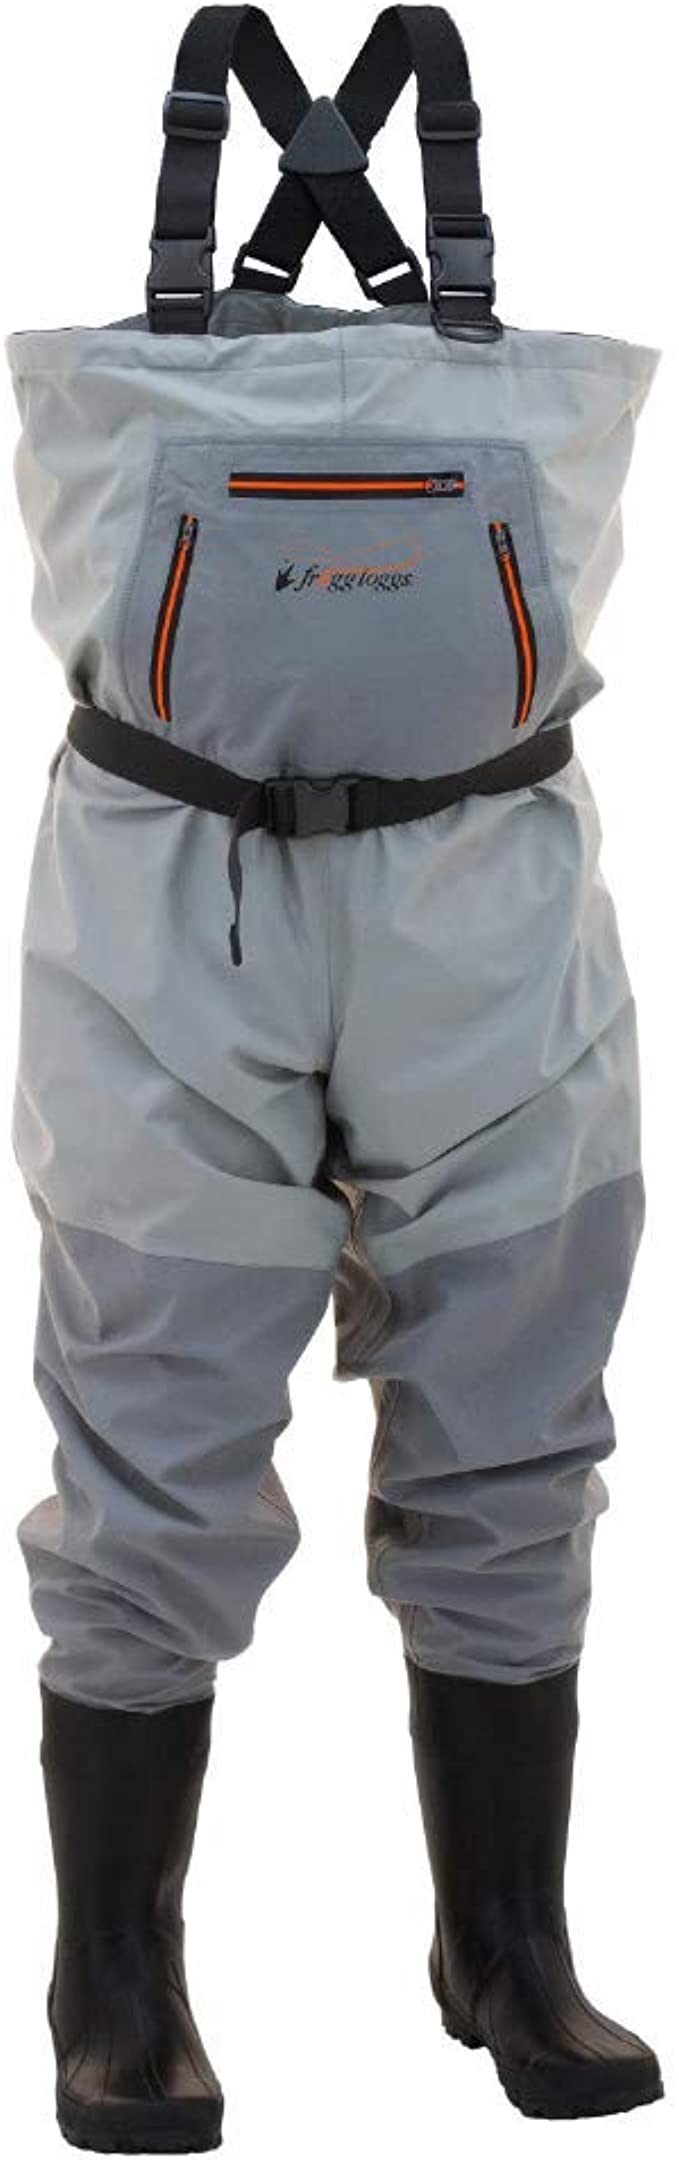 Frogg Toggs Men's Stout Hellbender Cleated Chest Wader, Slate/Gray